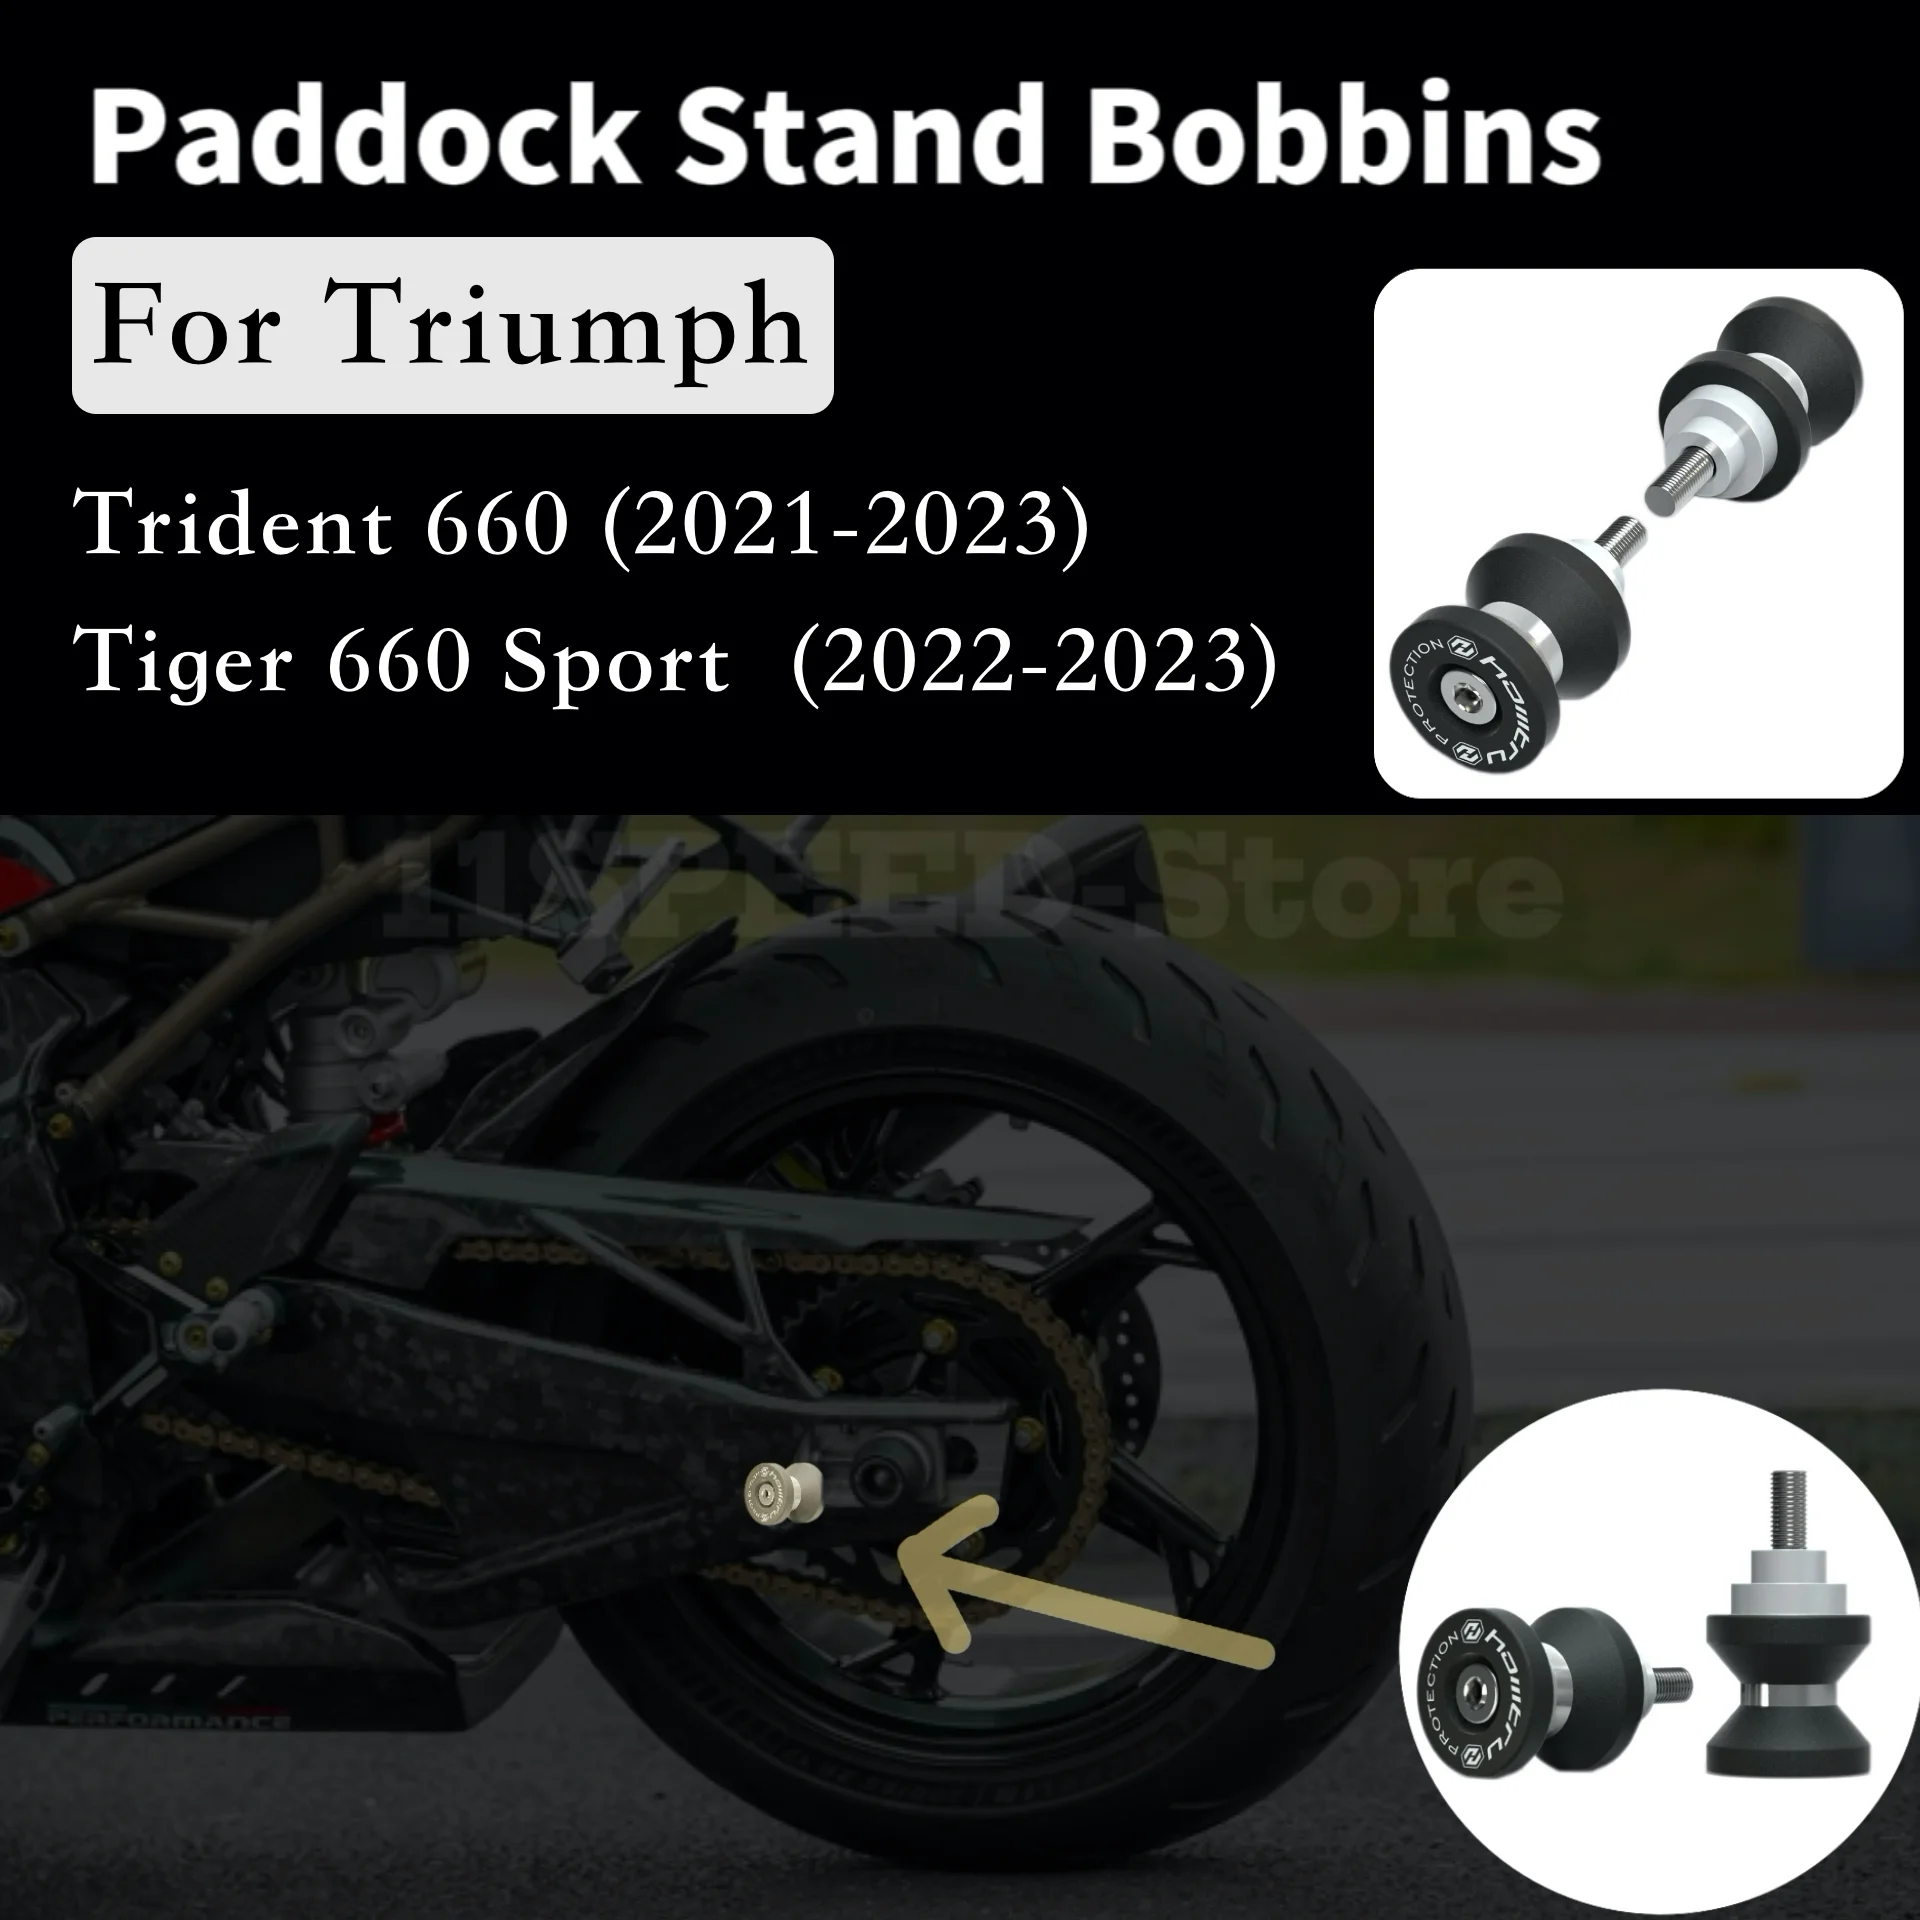 

Paddock Stand Bobbins For Triumph Trident 660 Tiger 660 Sport 2021 2022 2023 motorcycle accessories for protection